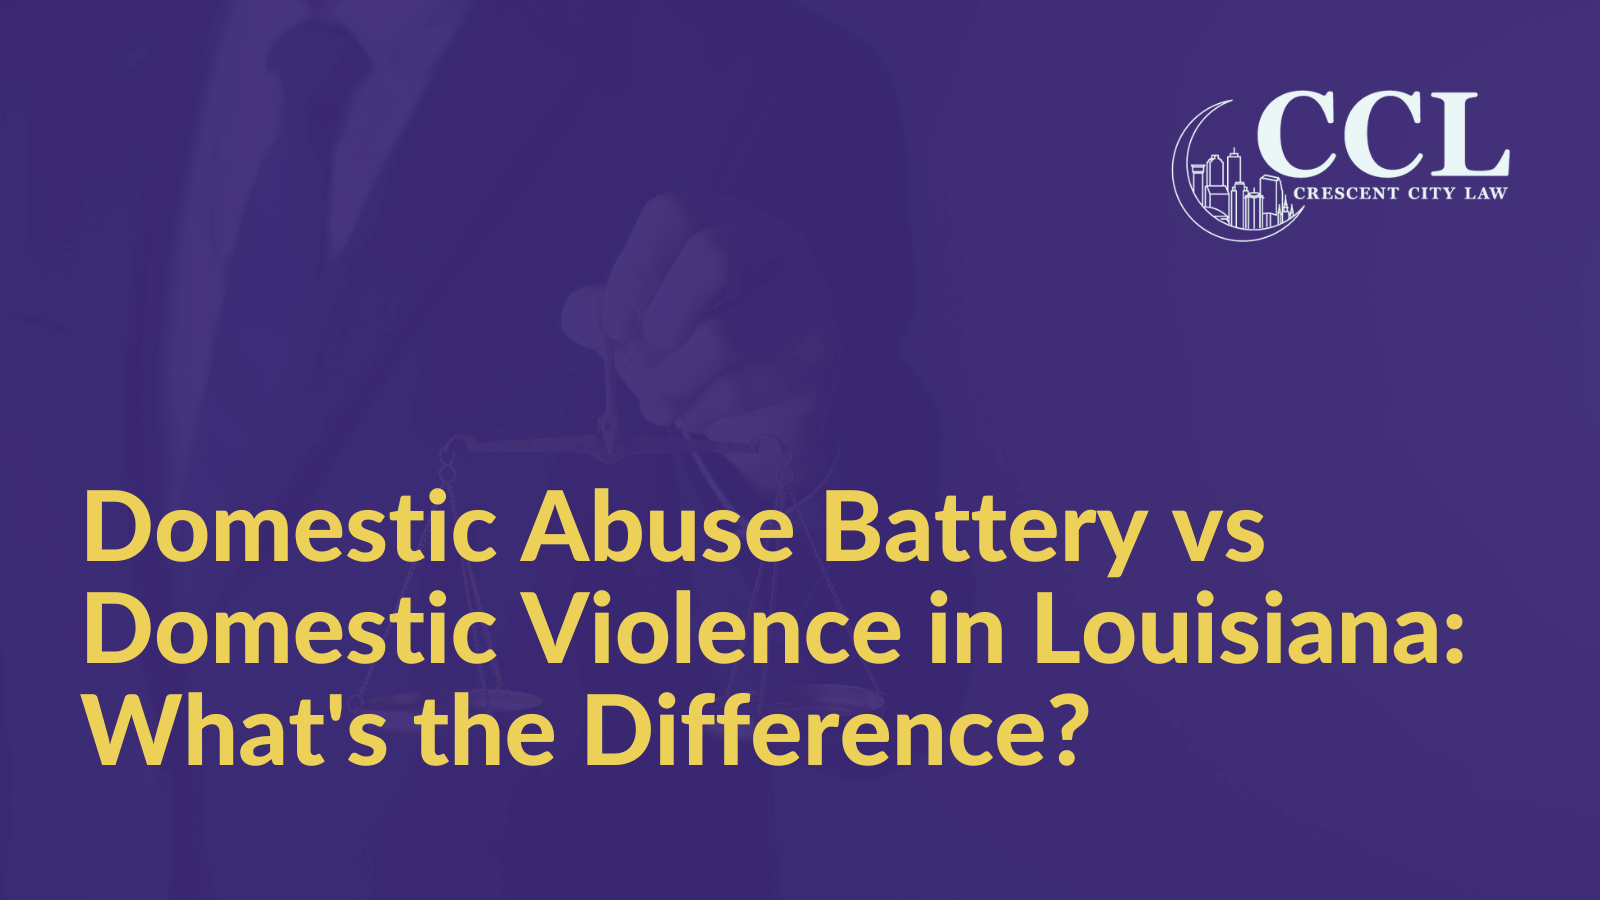 Domestic Abuse Battery vs Domestic Violence in Louisiana: What's the Difference?